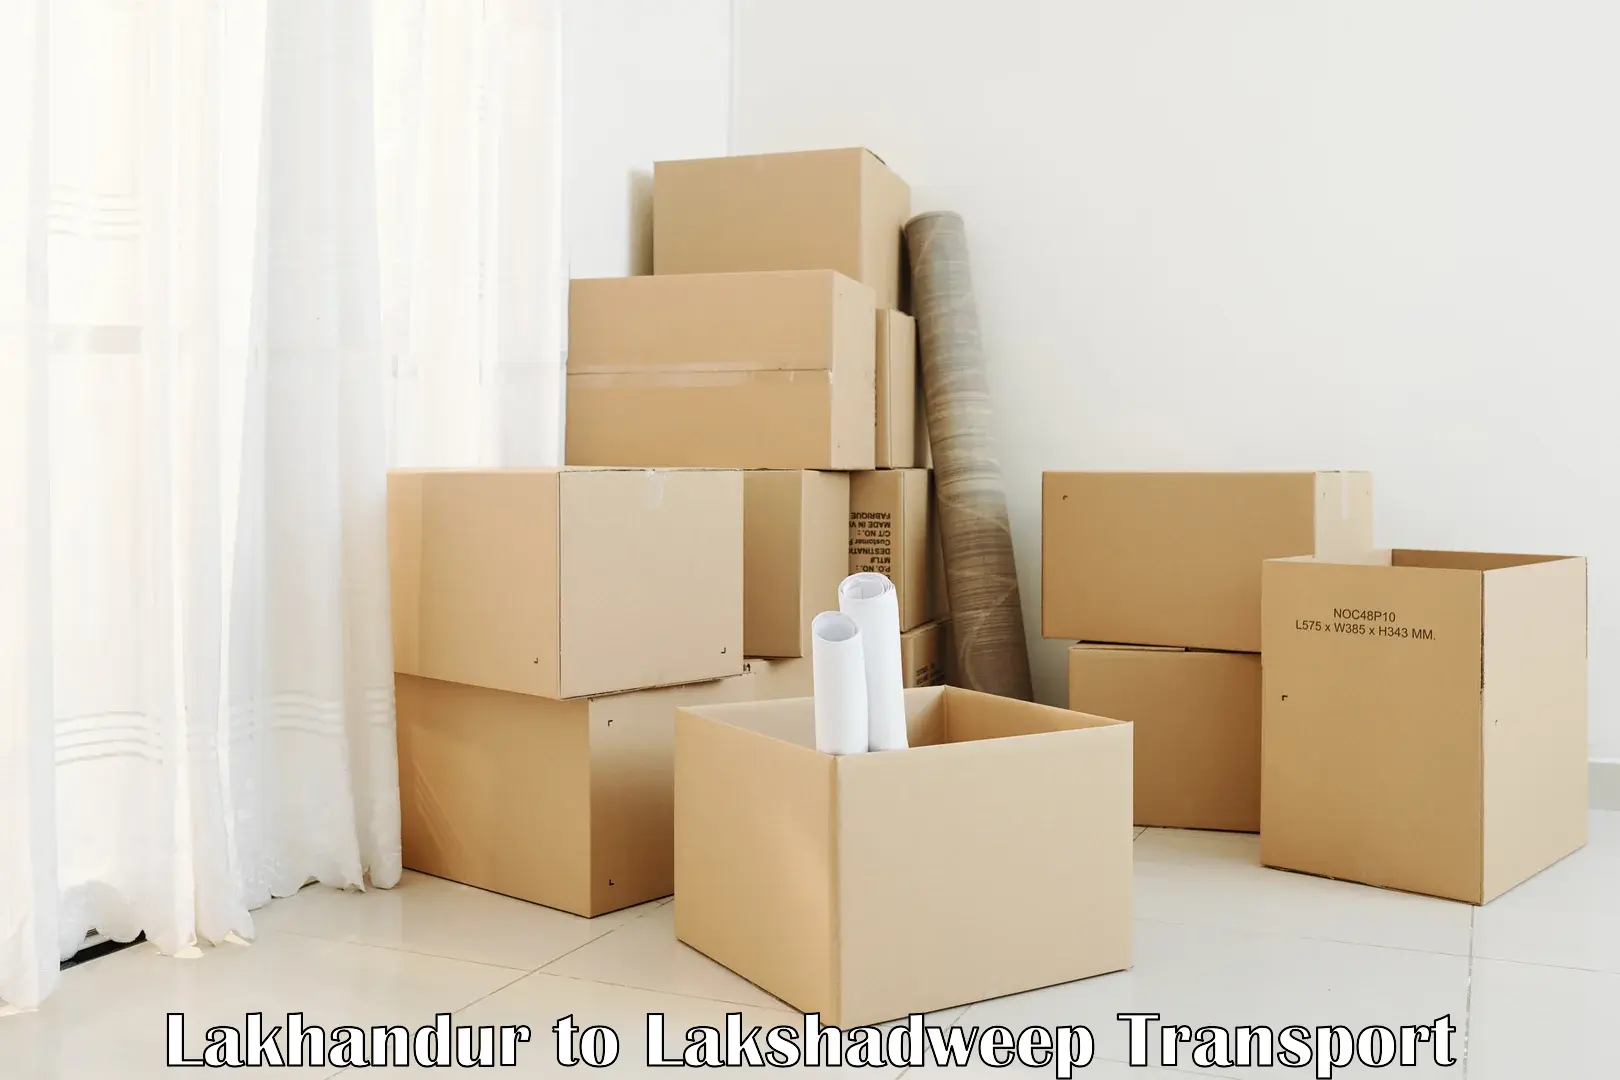 Material transport services Lakhandur to Lakshadweep